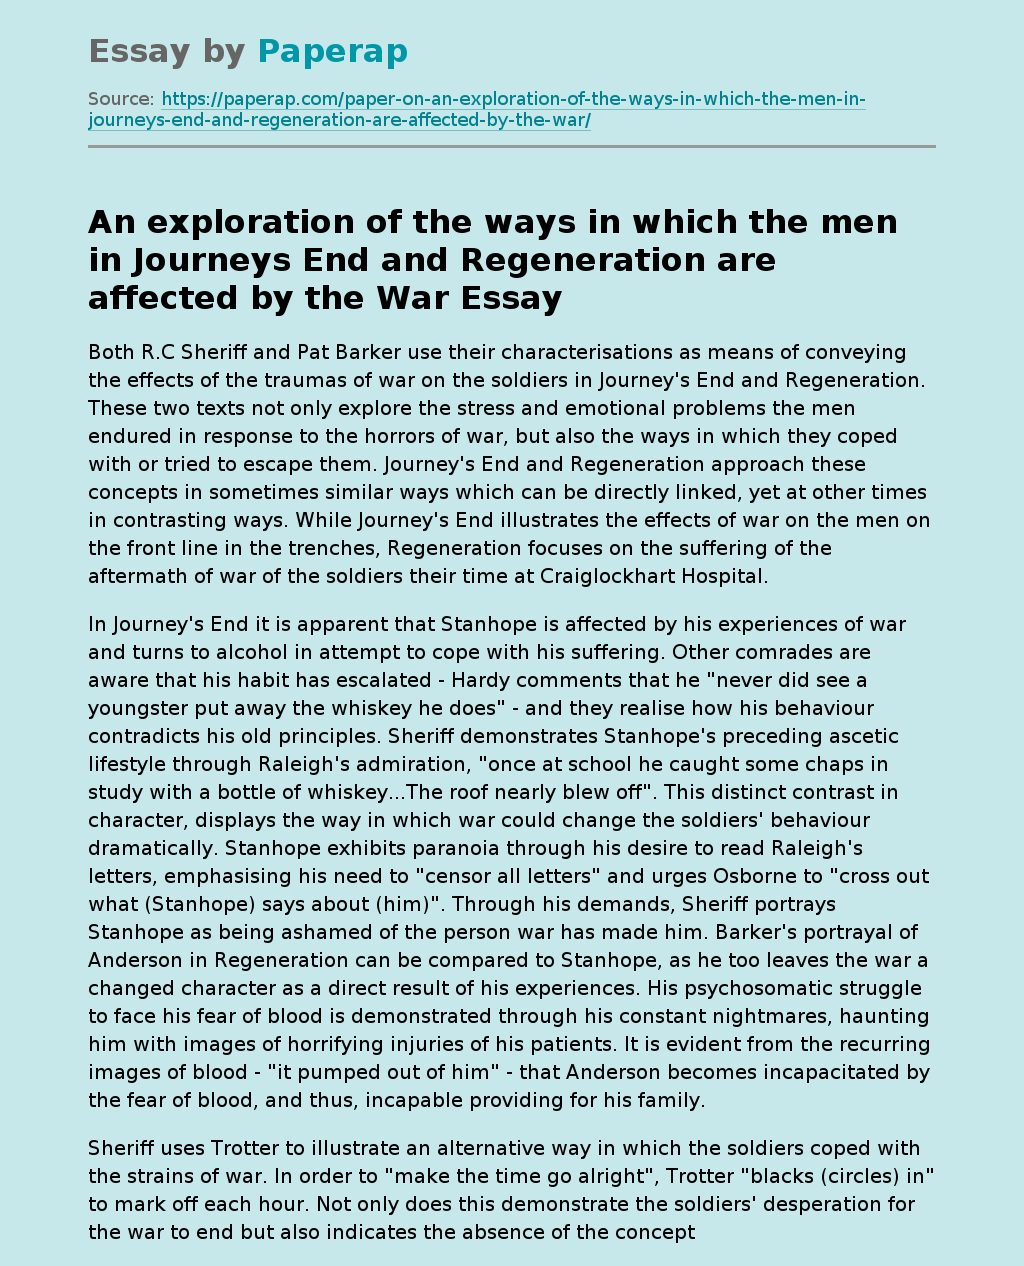 An exploration of the Ways in Which the men in Journeys End and Regeneration are affected by the War